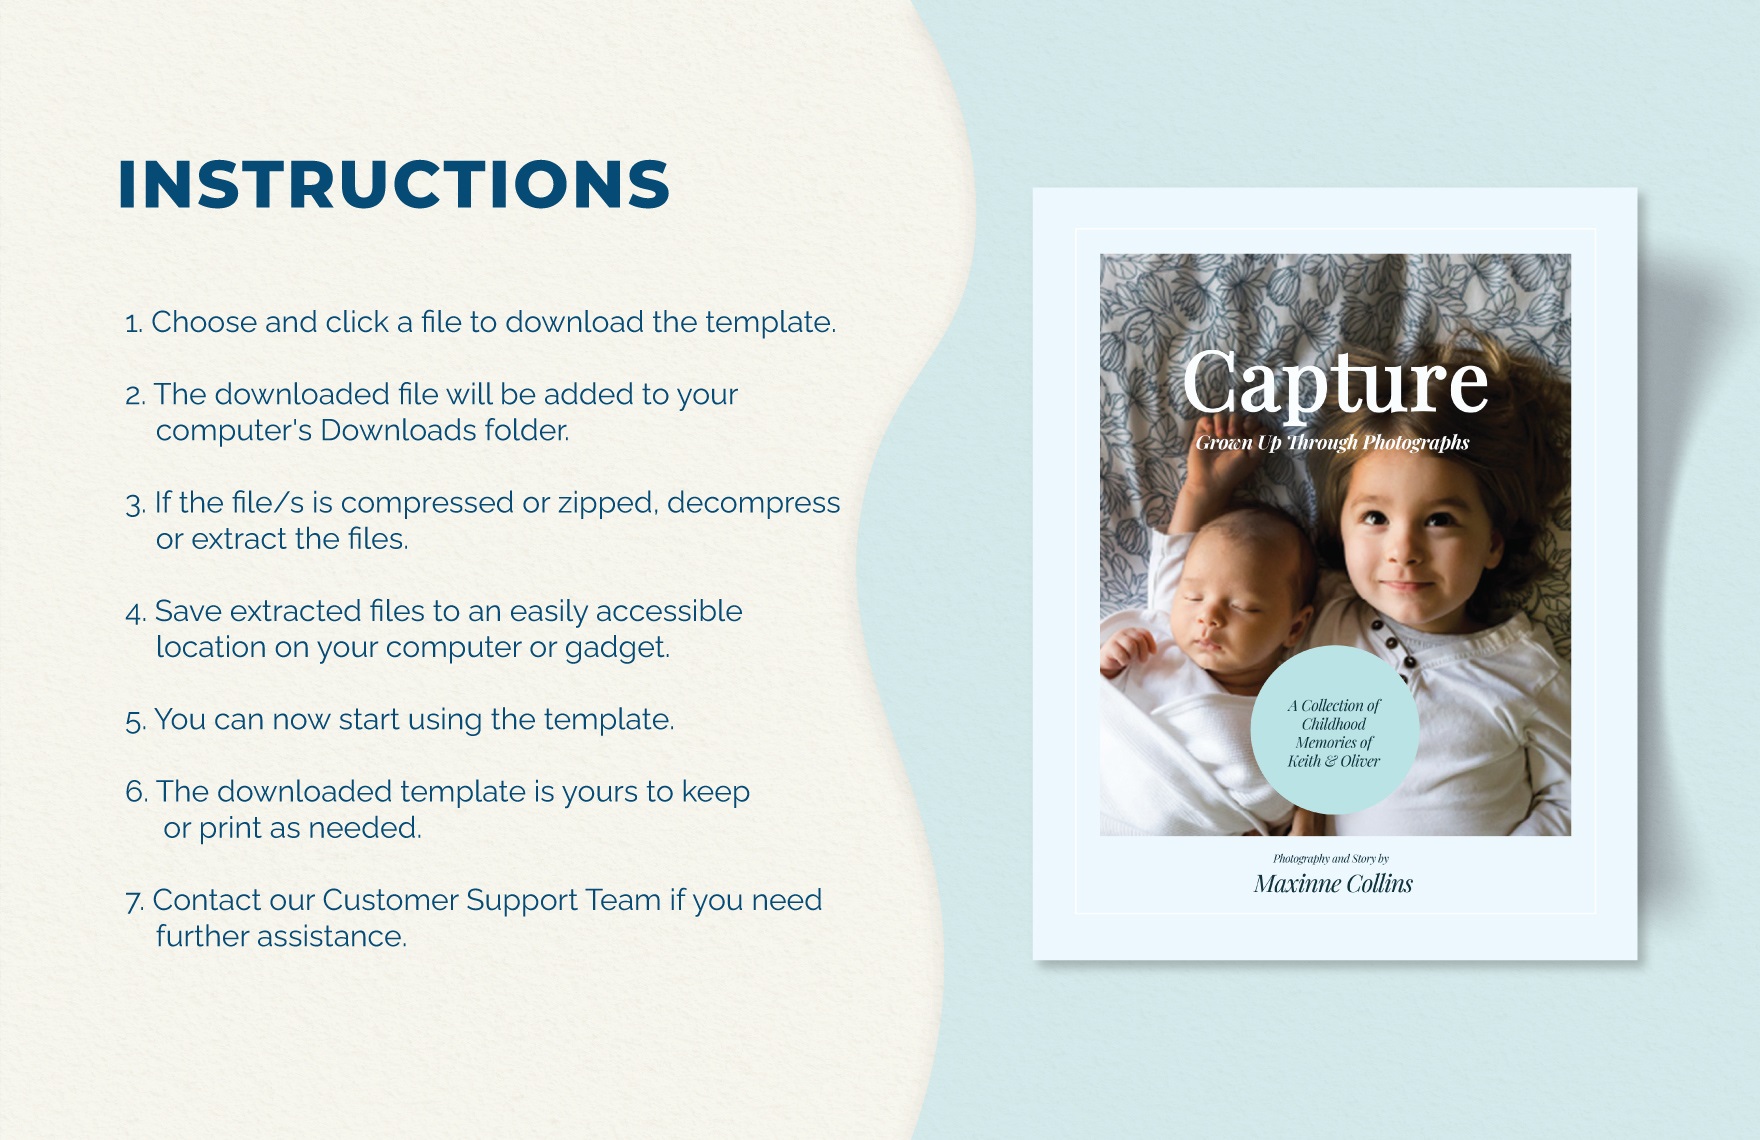 Kid's Photo Book Cover Template